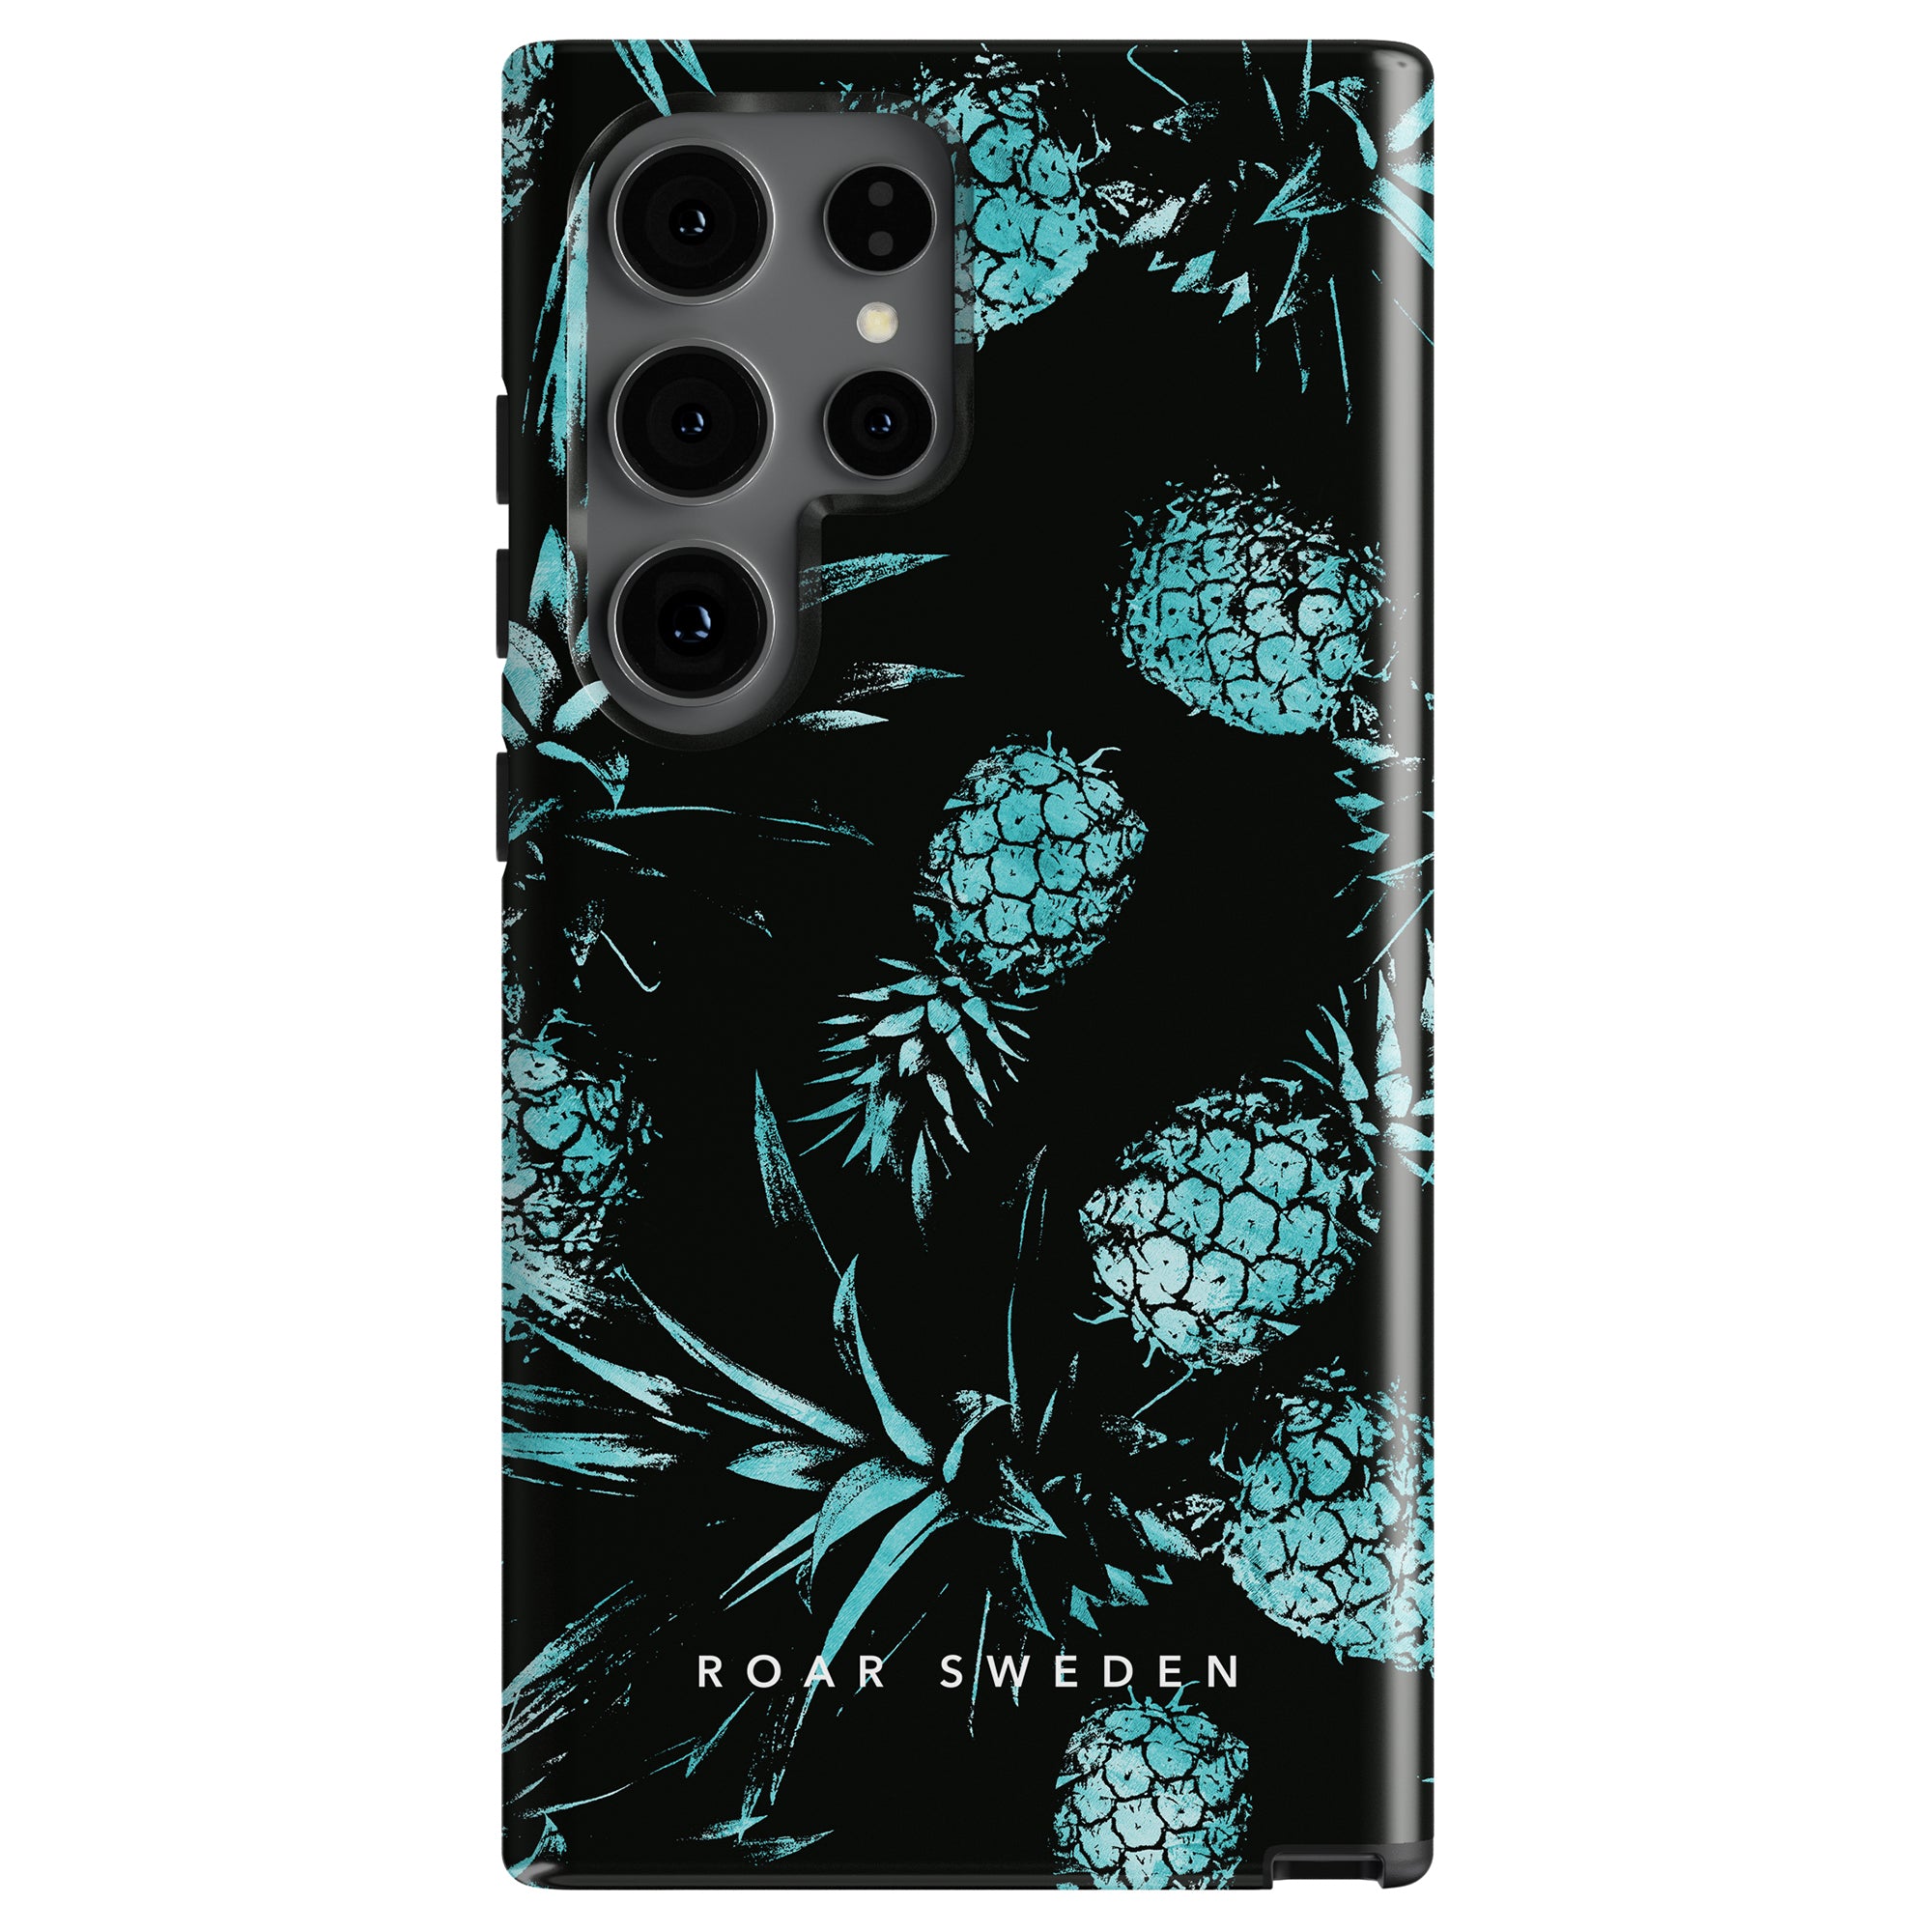 A Turquoise Pineapples - Tough Case with a black background featuring a pattern of turquoise pineapples and "ROAR SWEDEN" text at the bottom, part of our Exotic Collection.